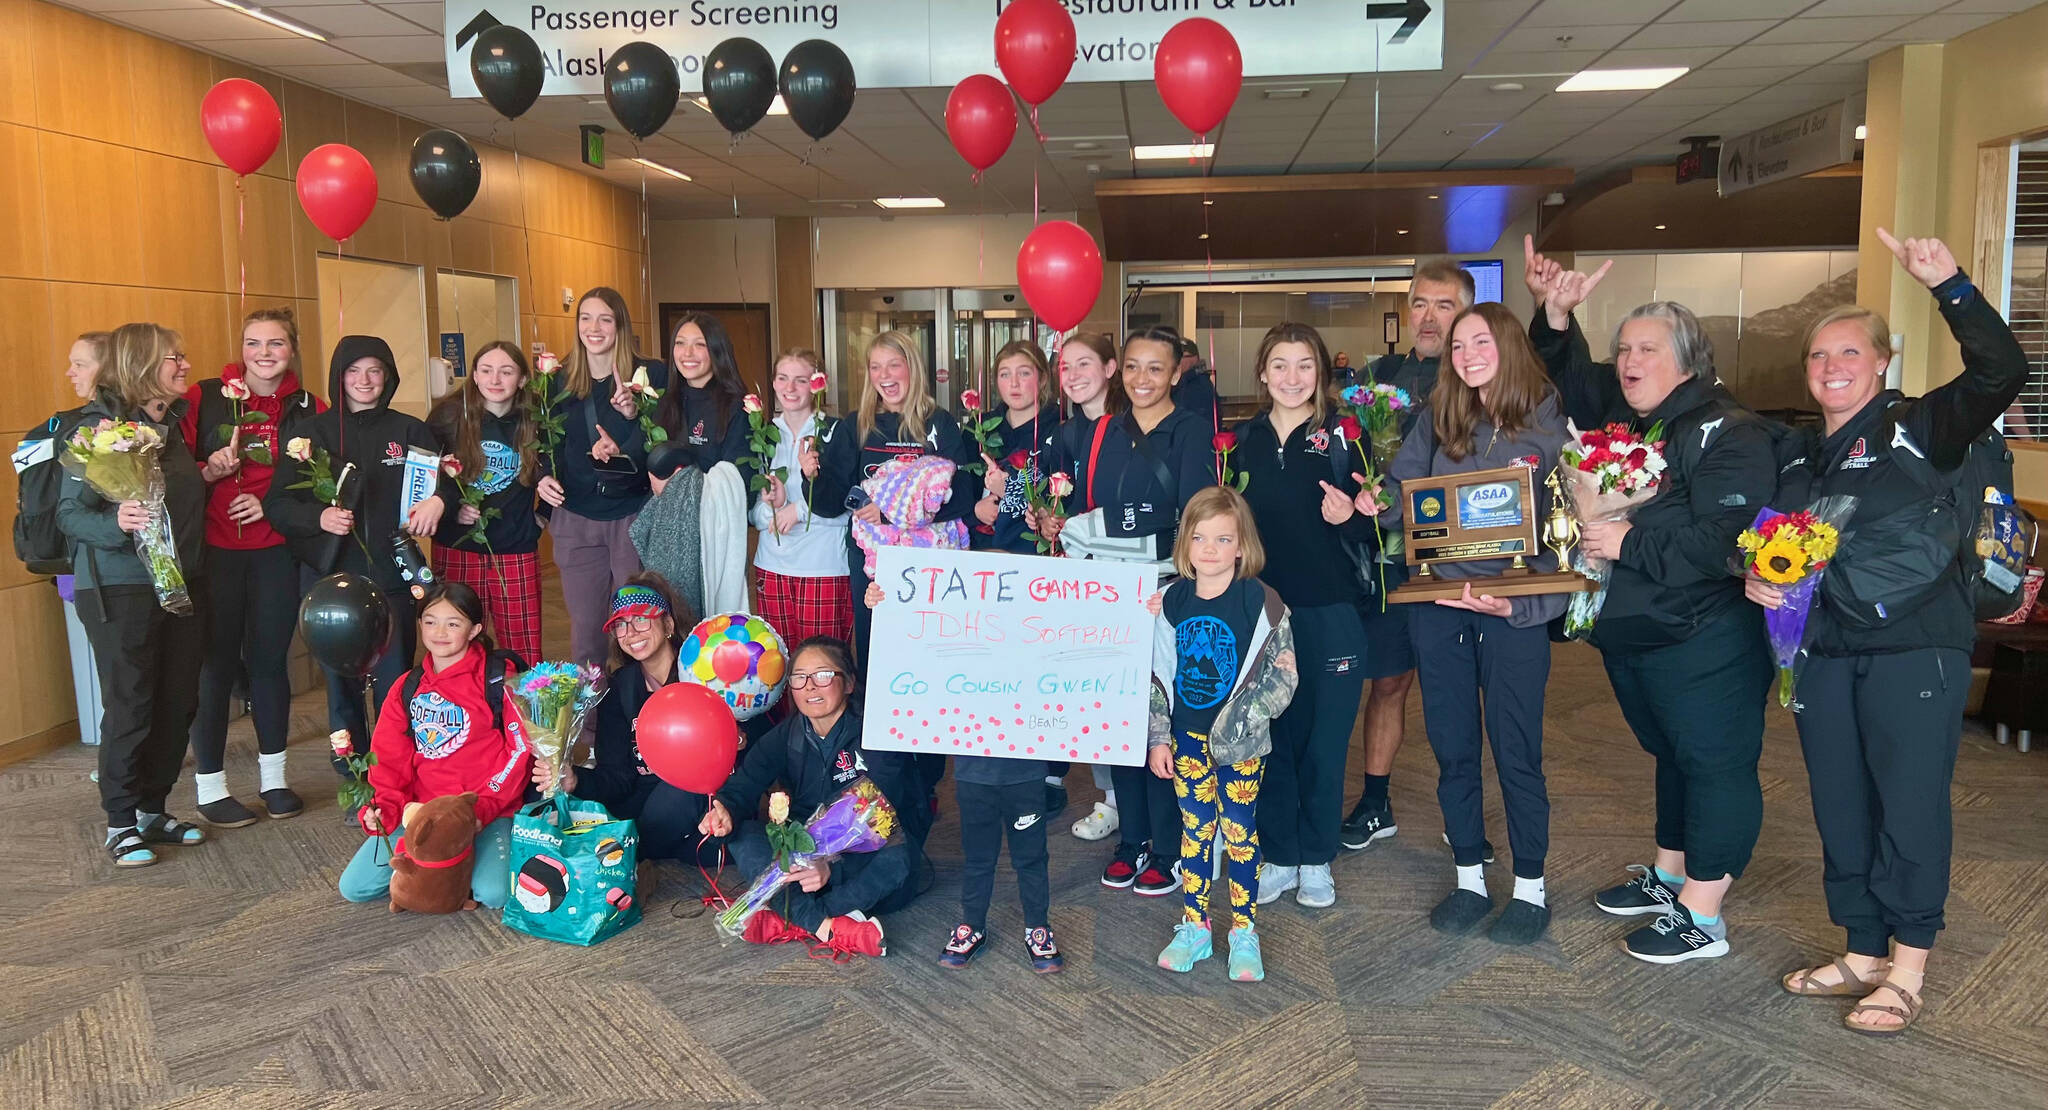 The JDHS Crimson Bears pose with their championship trophy upon arrival at the Juneau airport on Sunday after defeating the Sitka Wolves 6-5 on Saturday on for the ASAA Division II State Softball Championship at Anchorage’s Cartee Fields. (Courtesy Photo /JDHS Softball)